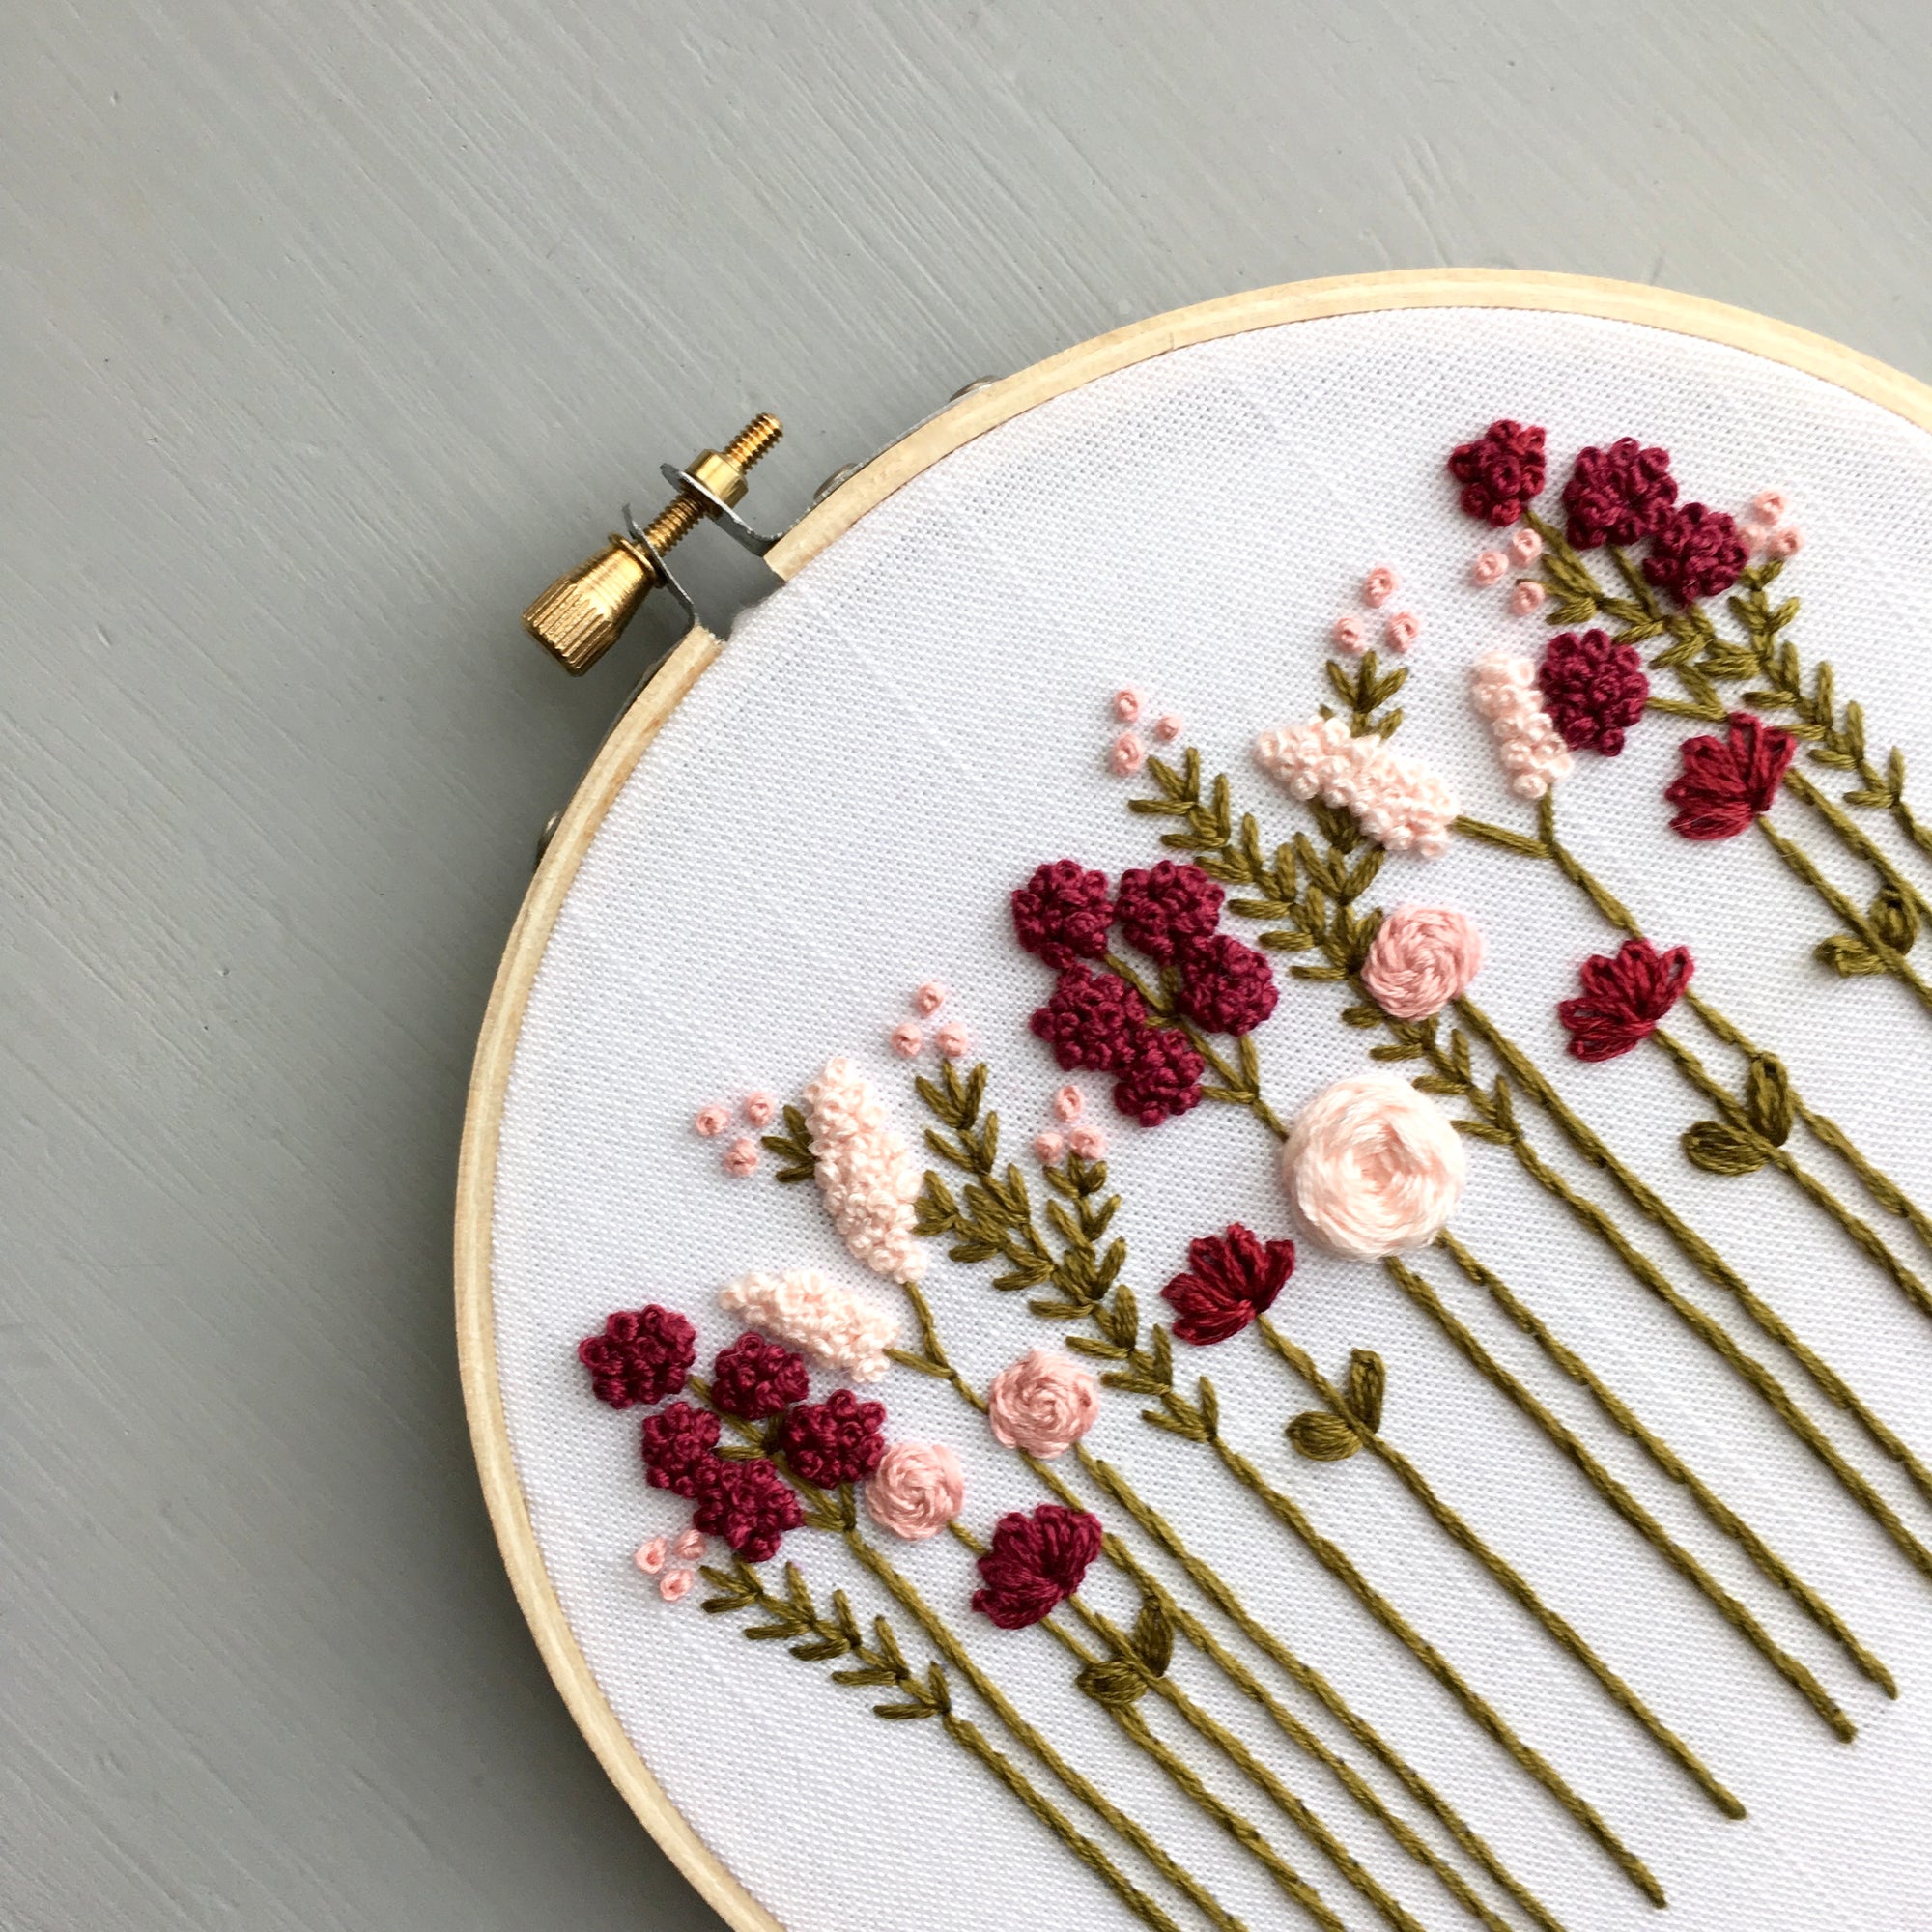 Embroidery 101: Finishing your hoop - And Other Adventures Embroidery Co